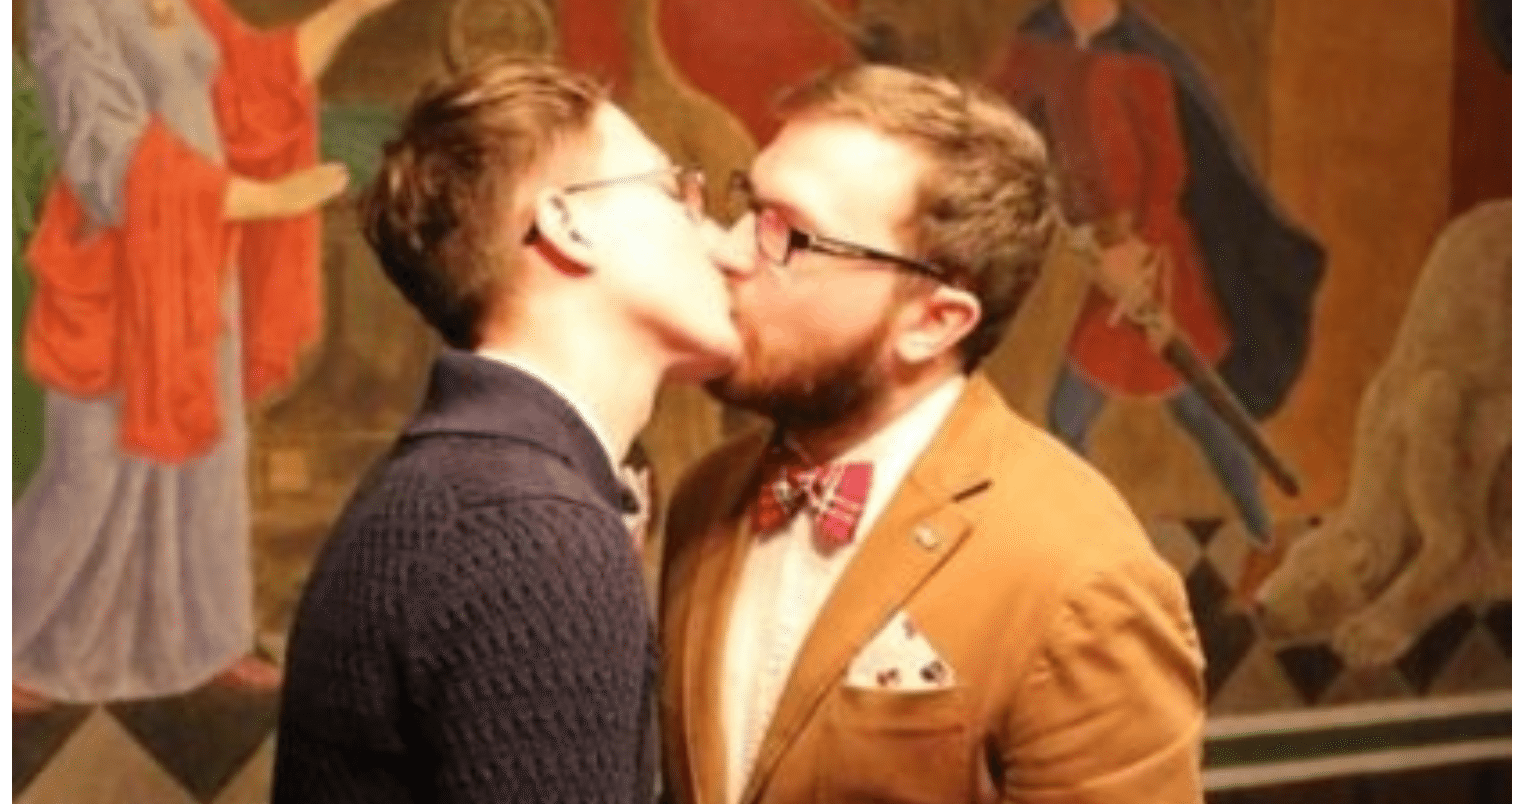 Married gay couple flee Russia after death threats